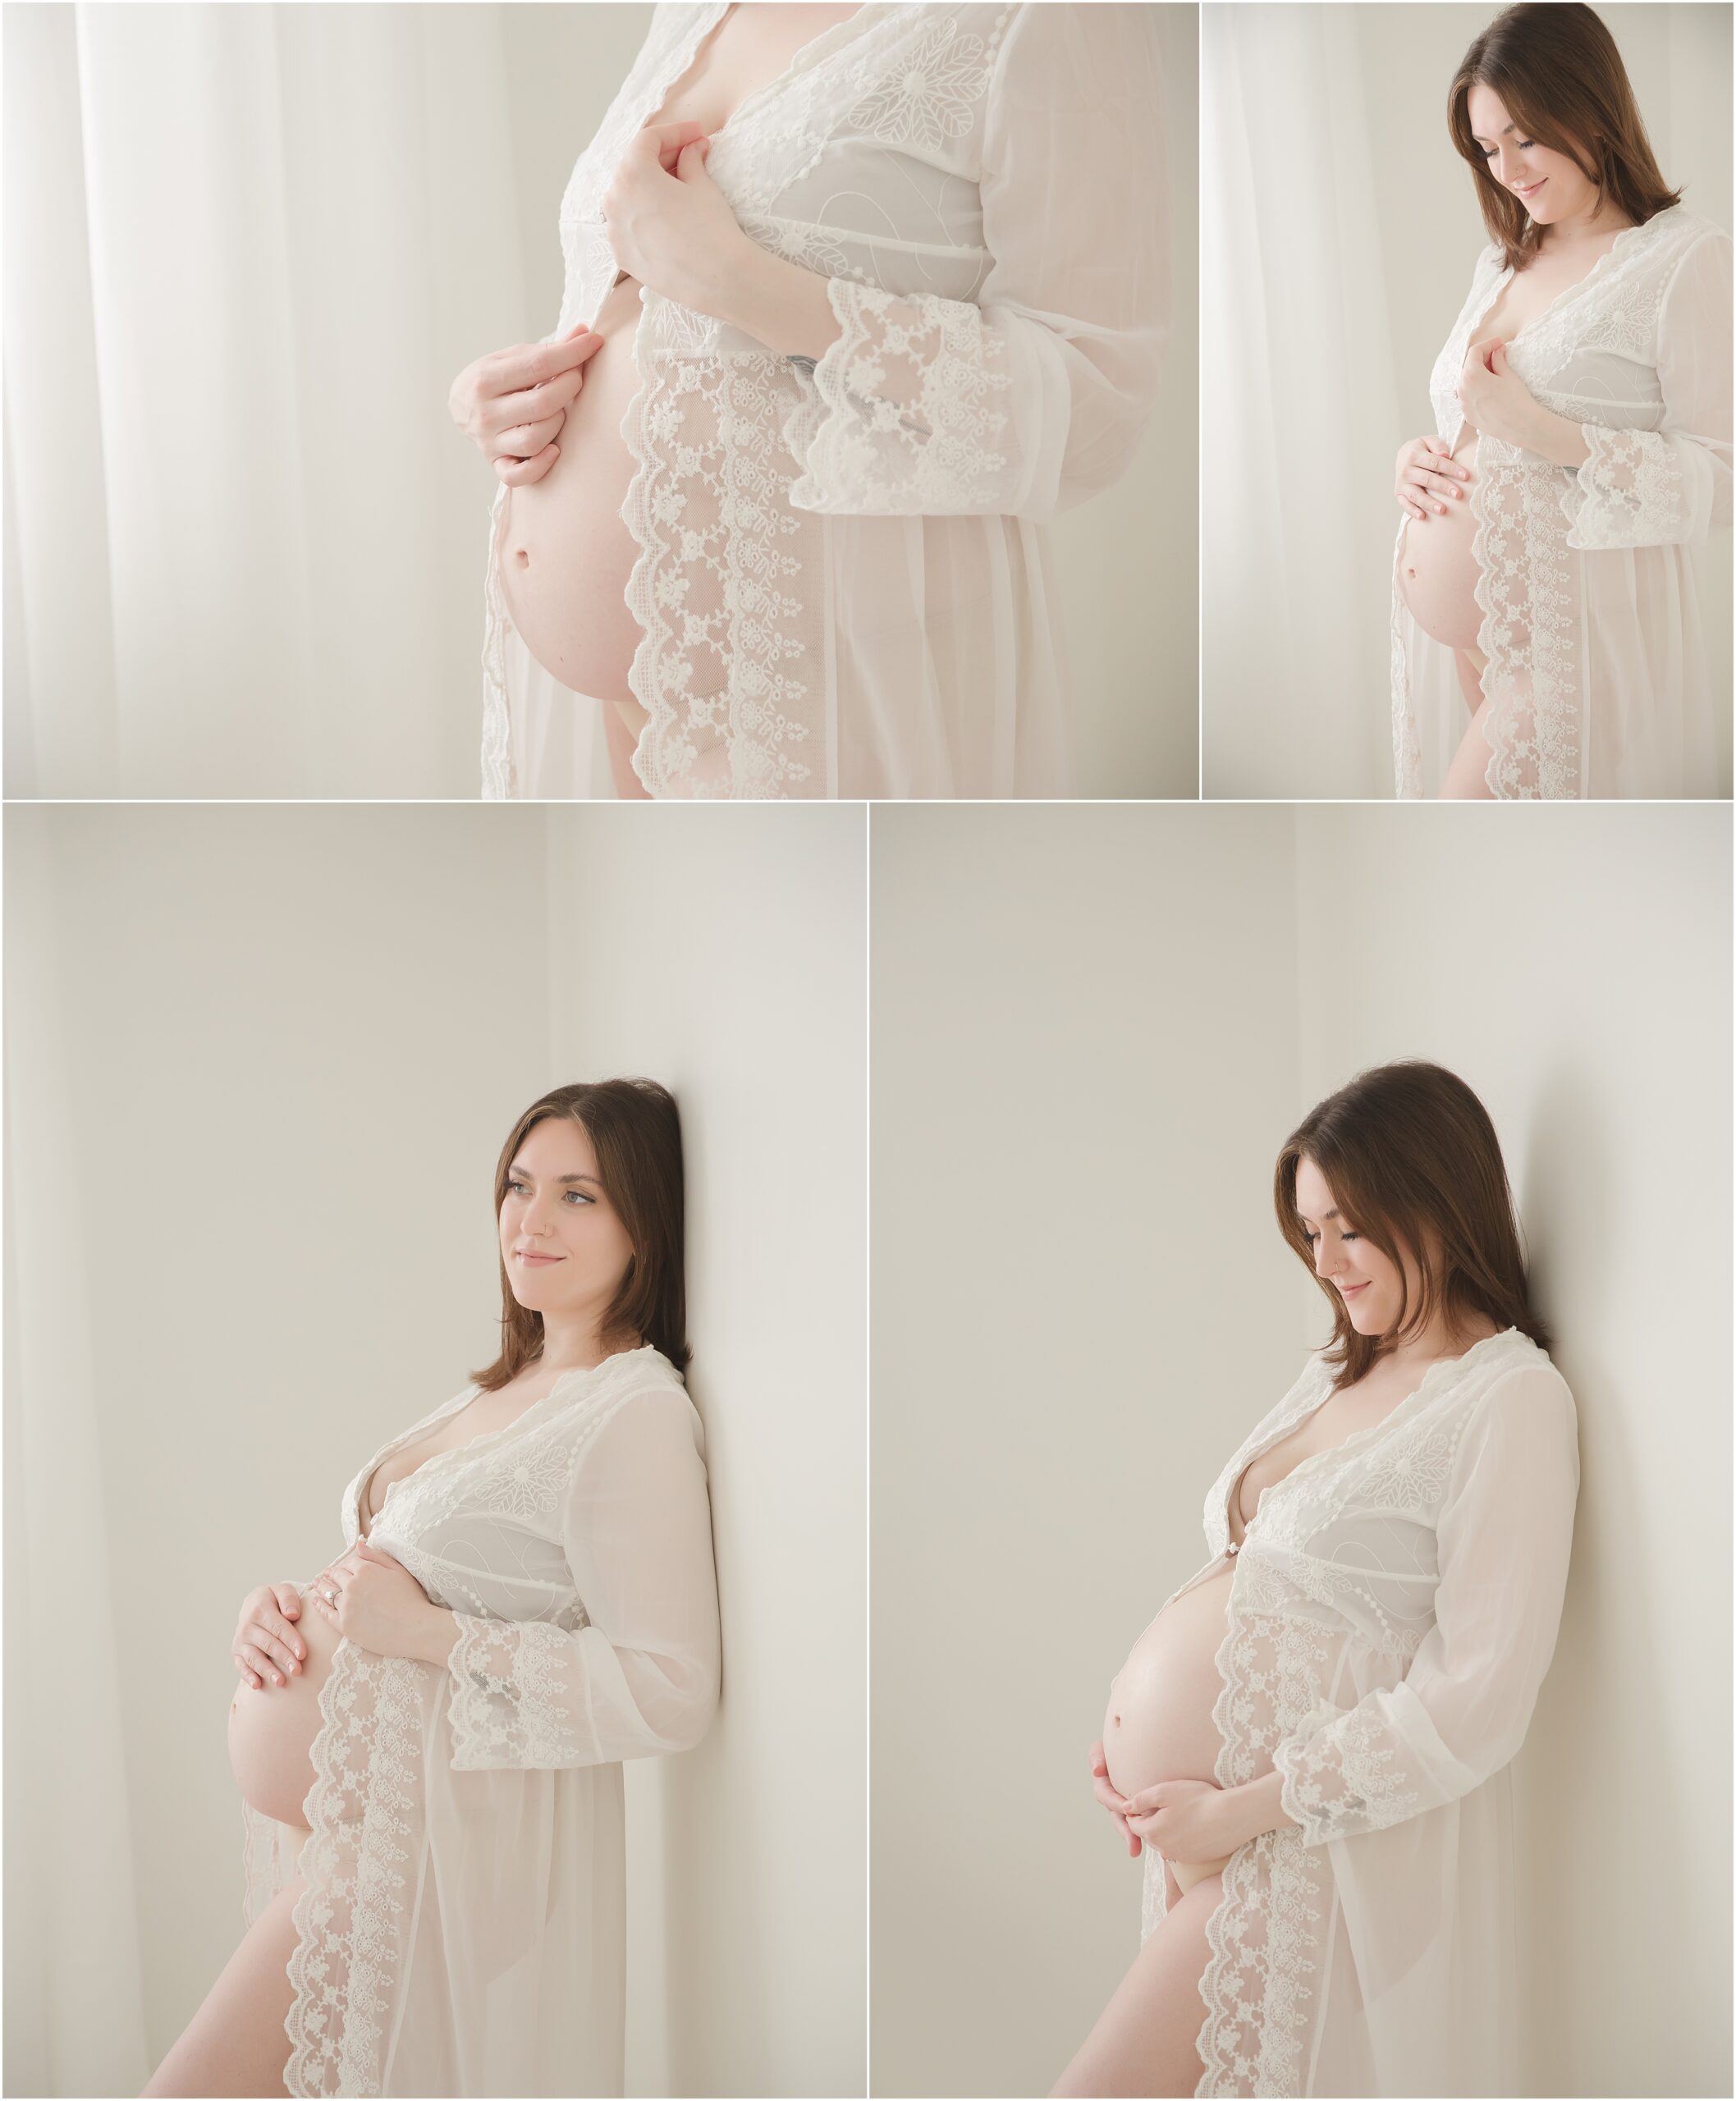 Woman with brown hair wearing a lacy robe poses for pregnancy photos